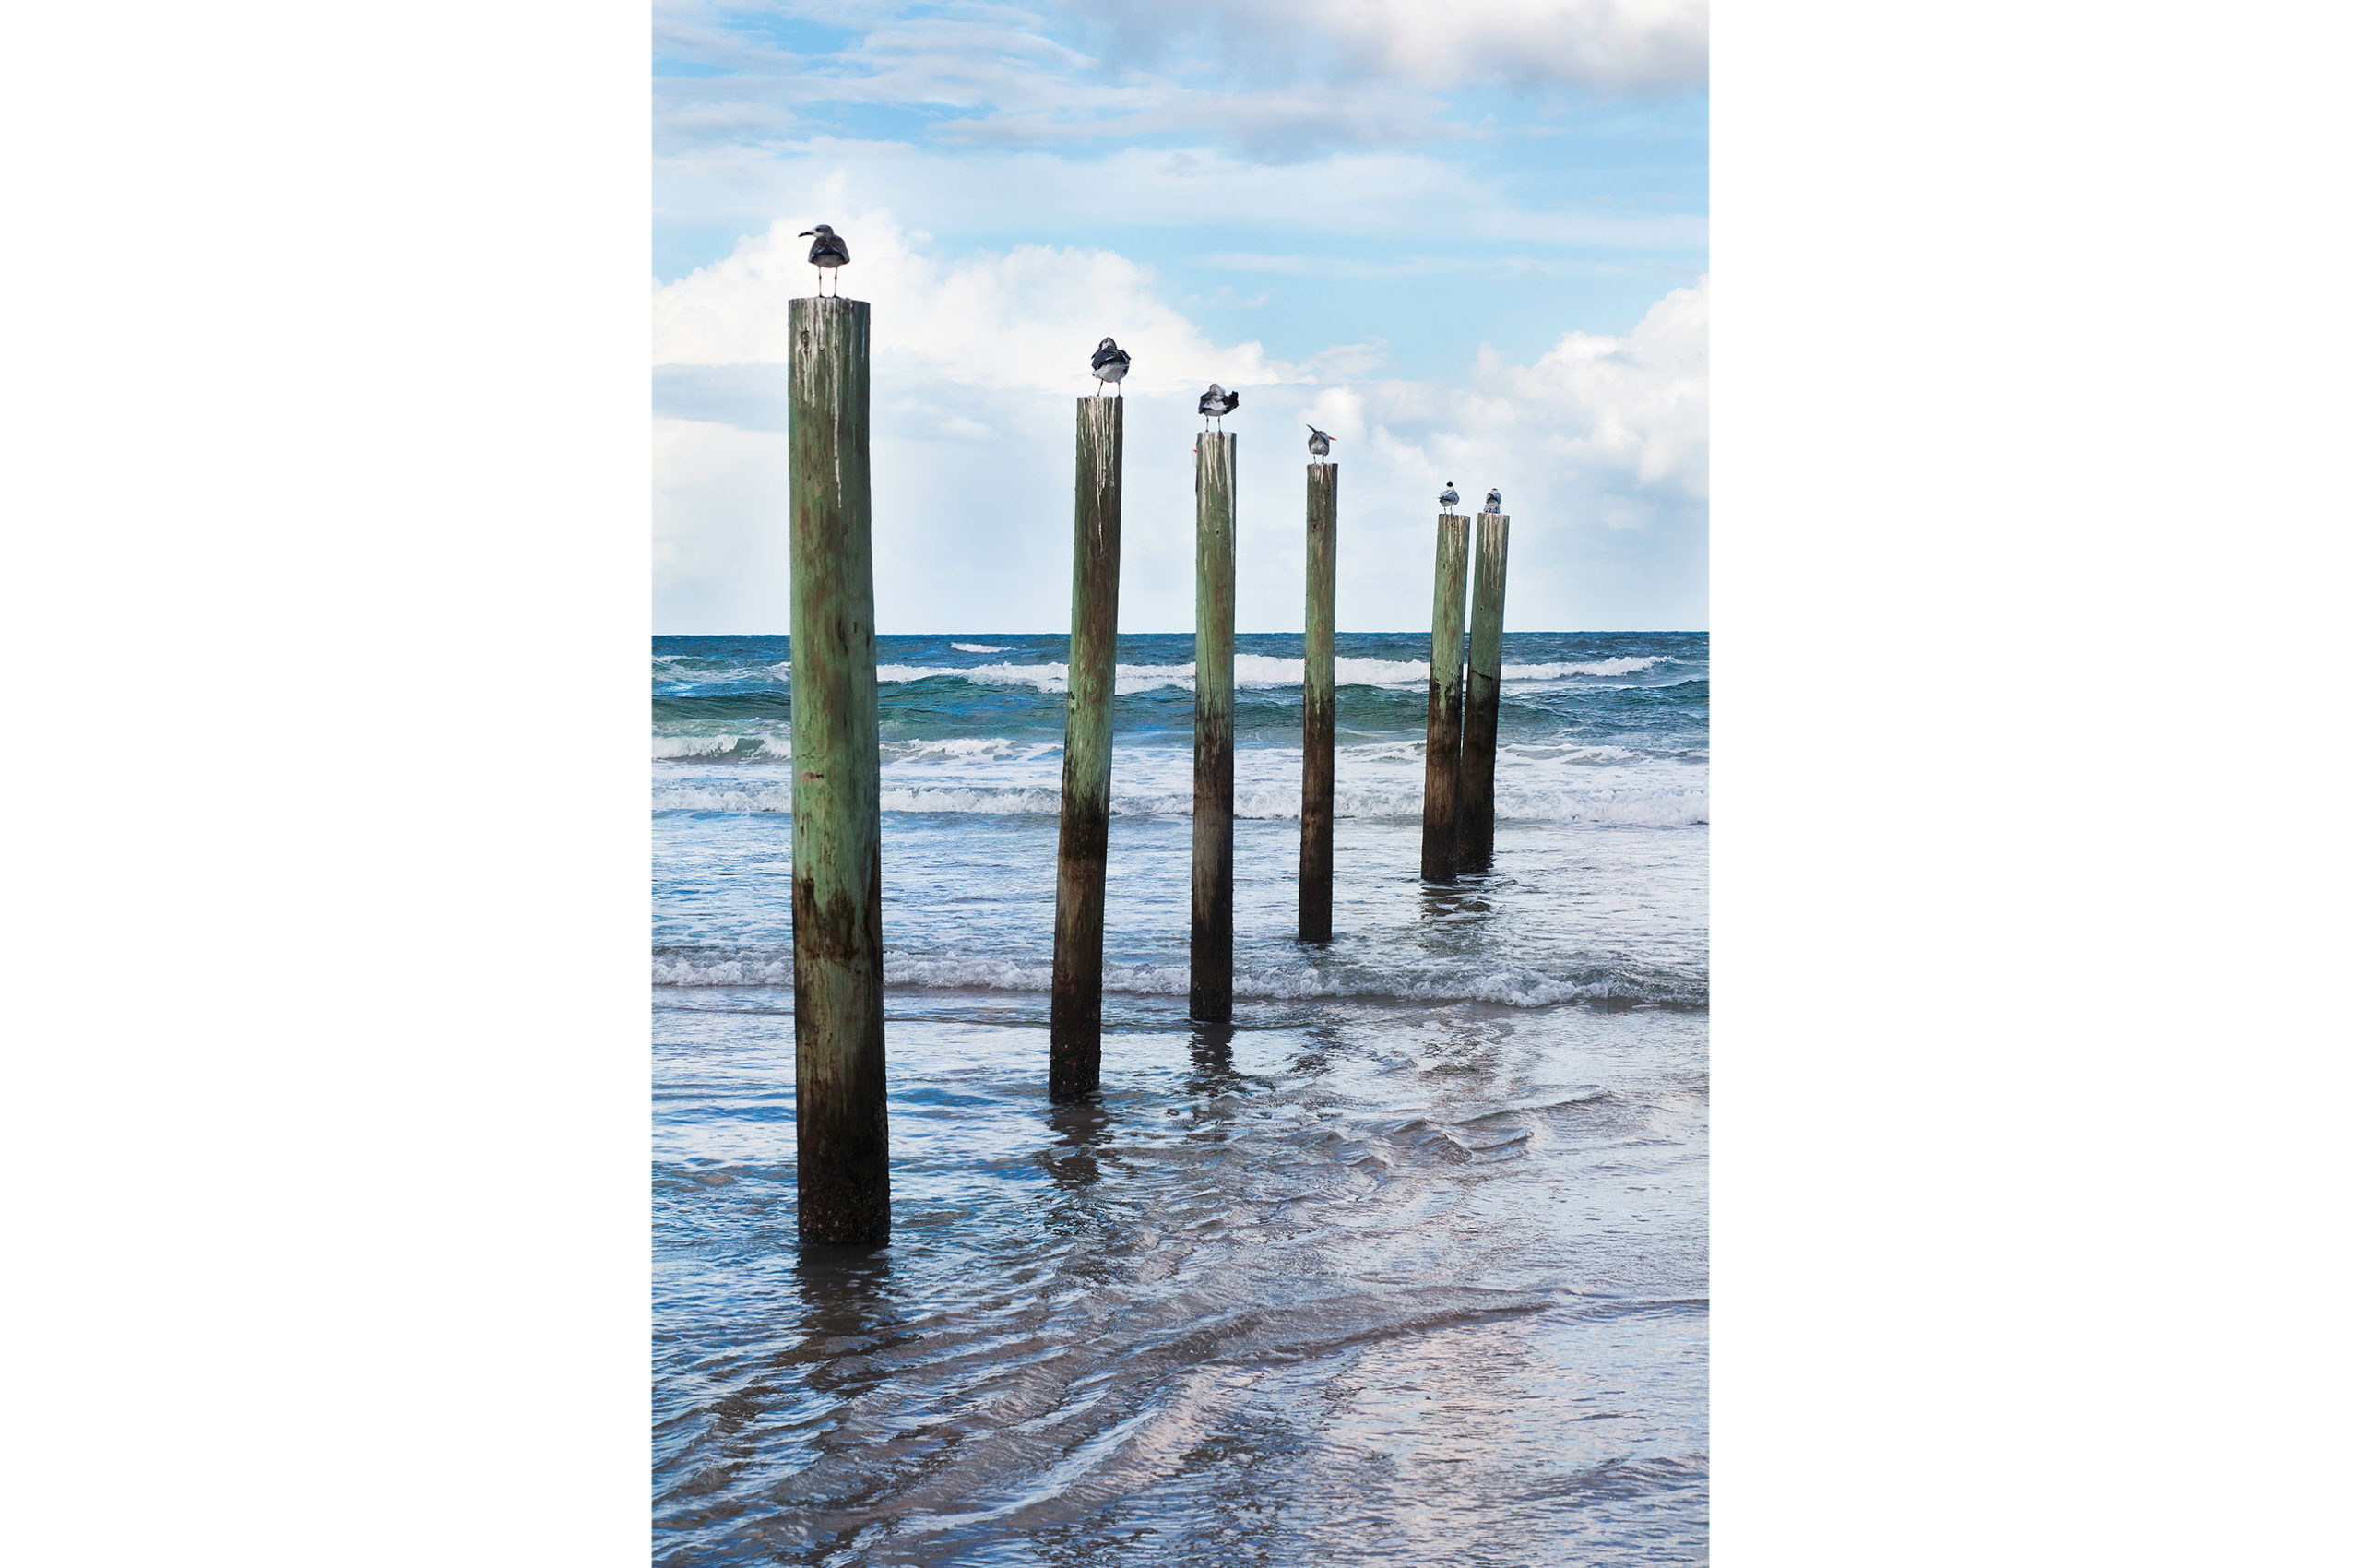 Tall image of Several birds standing on posts in shallow water